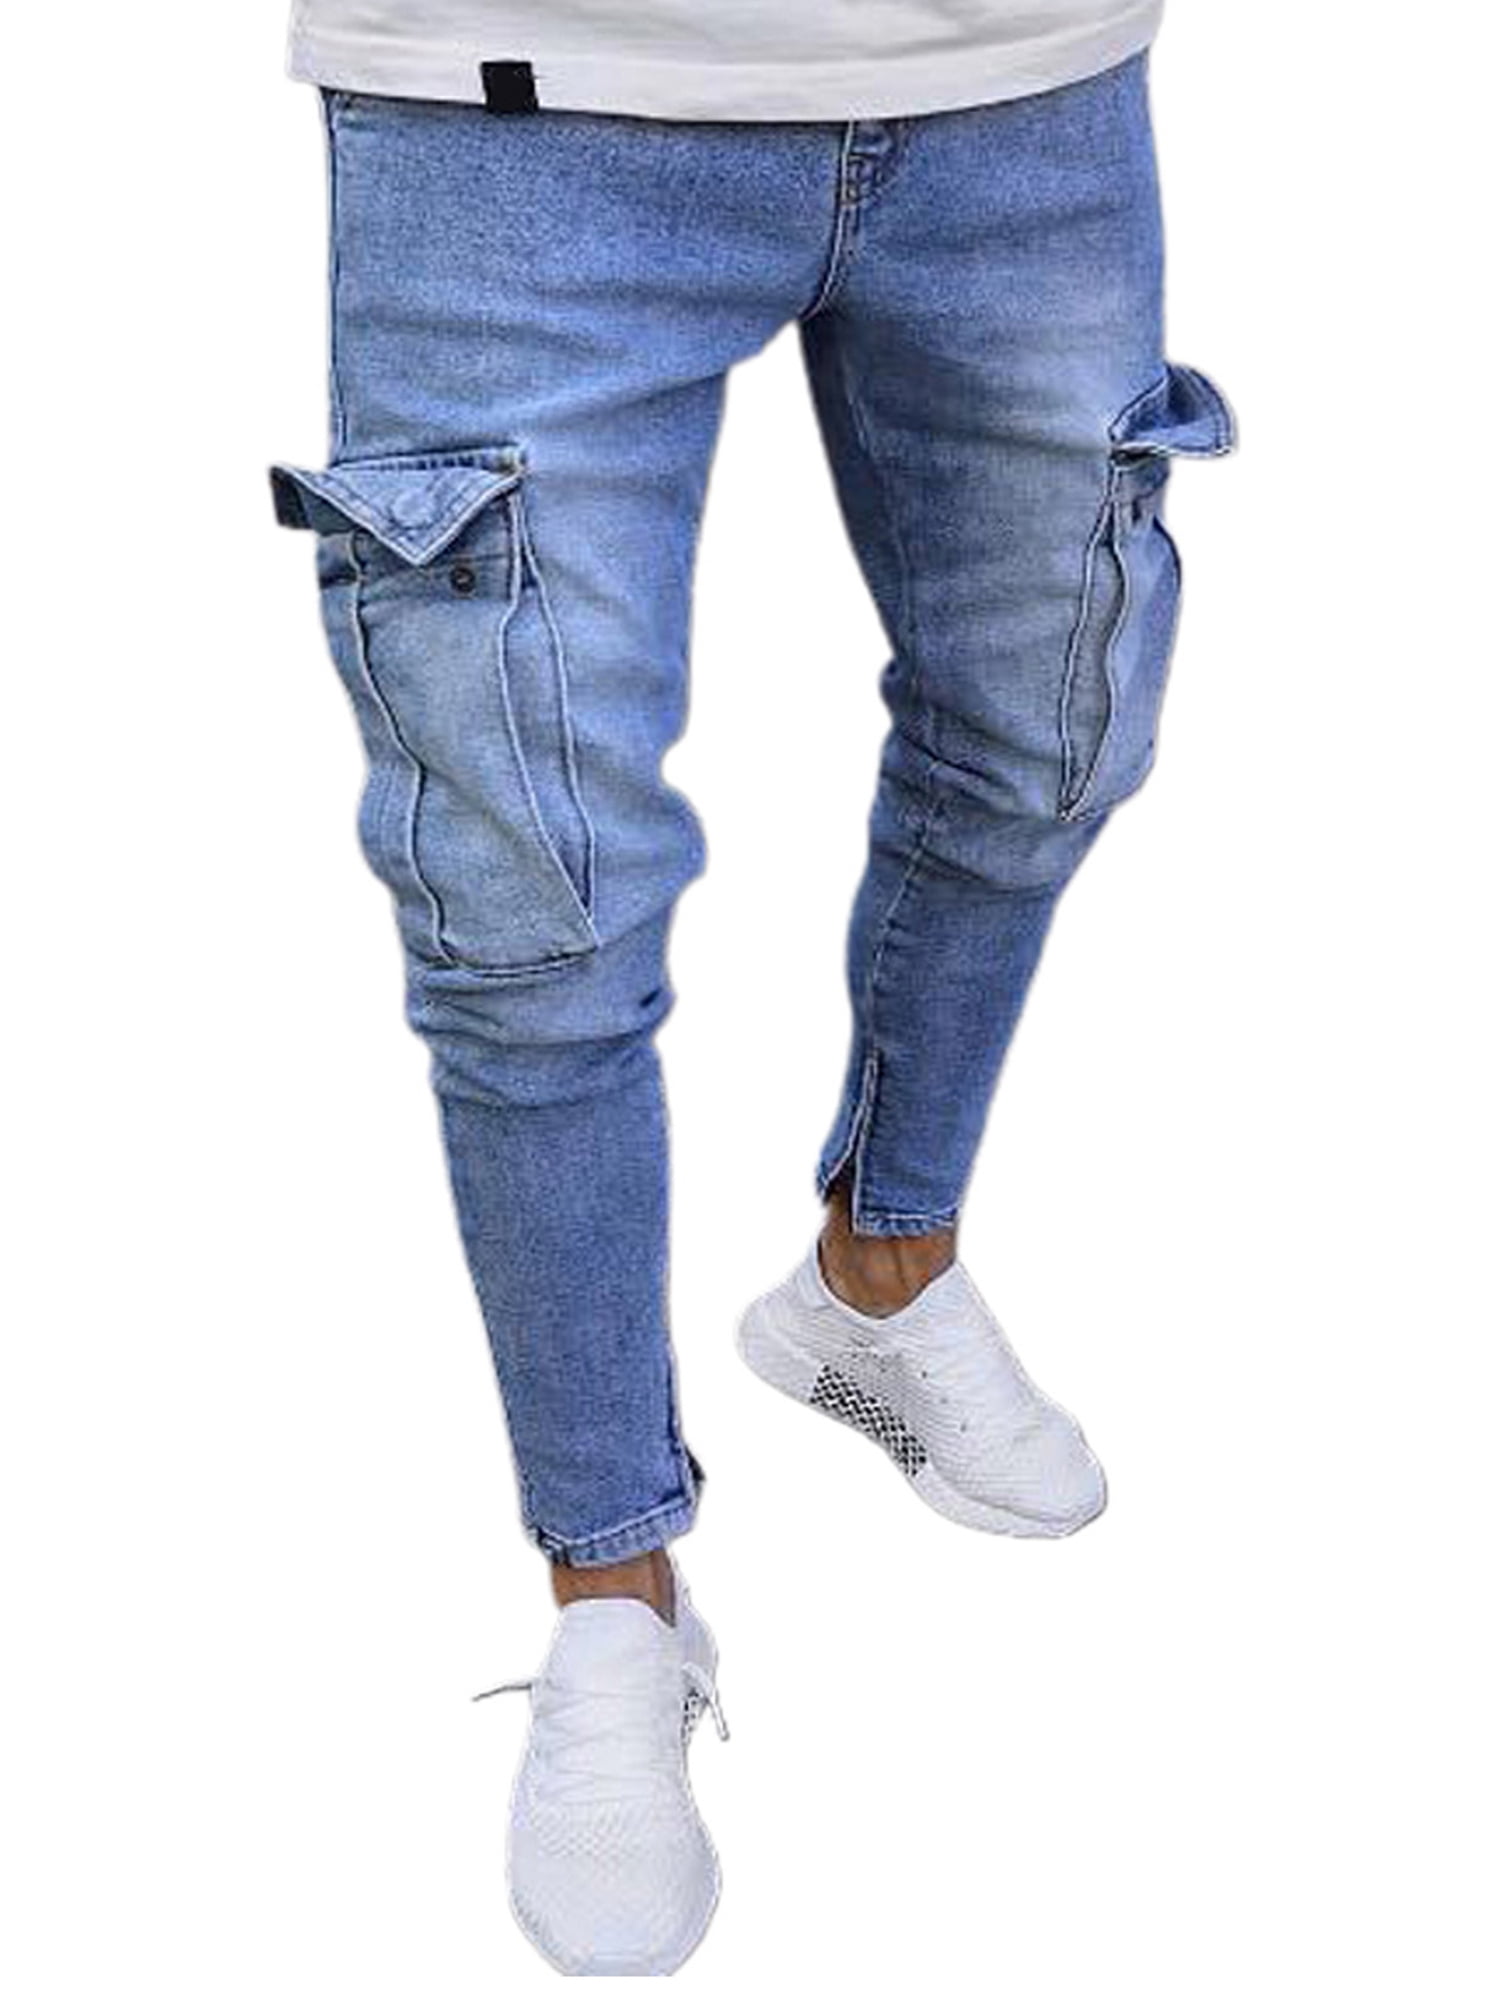 Mens Letter Stretch Jeans Ripped Denim Cargo Frayed Skinny Pants Pocket Trousers